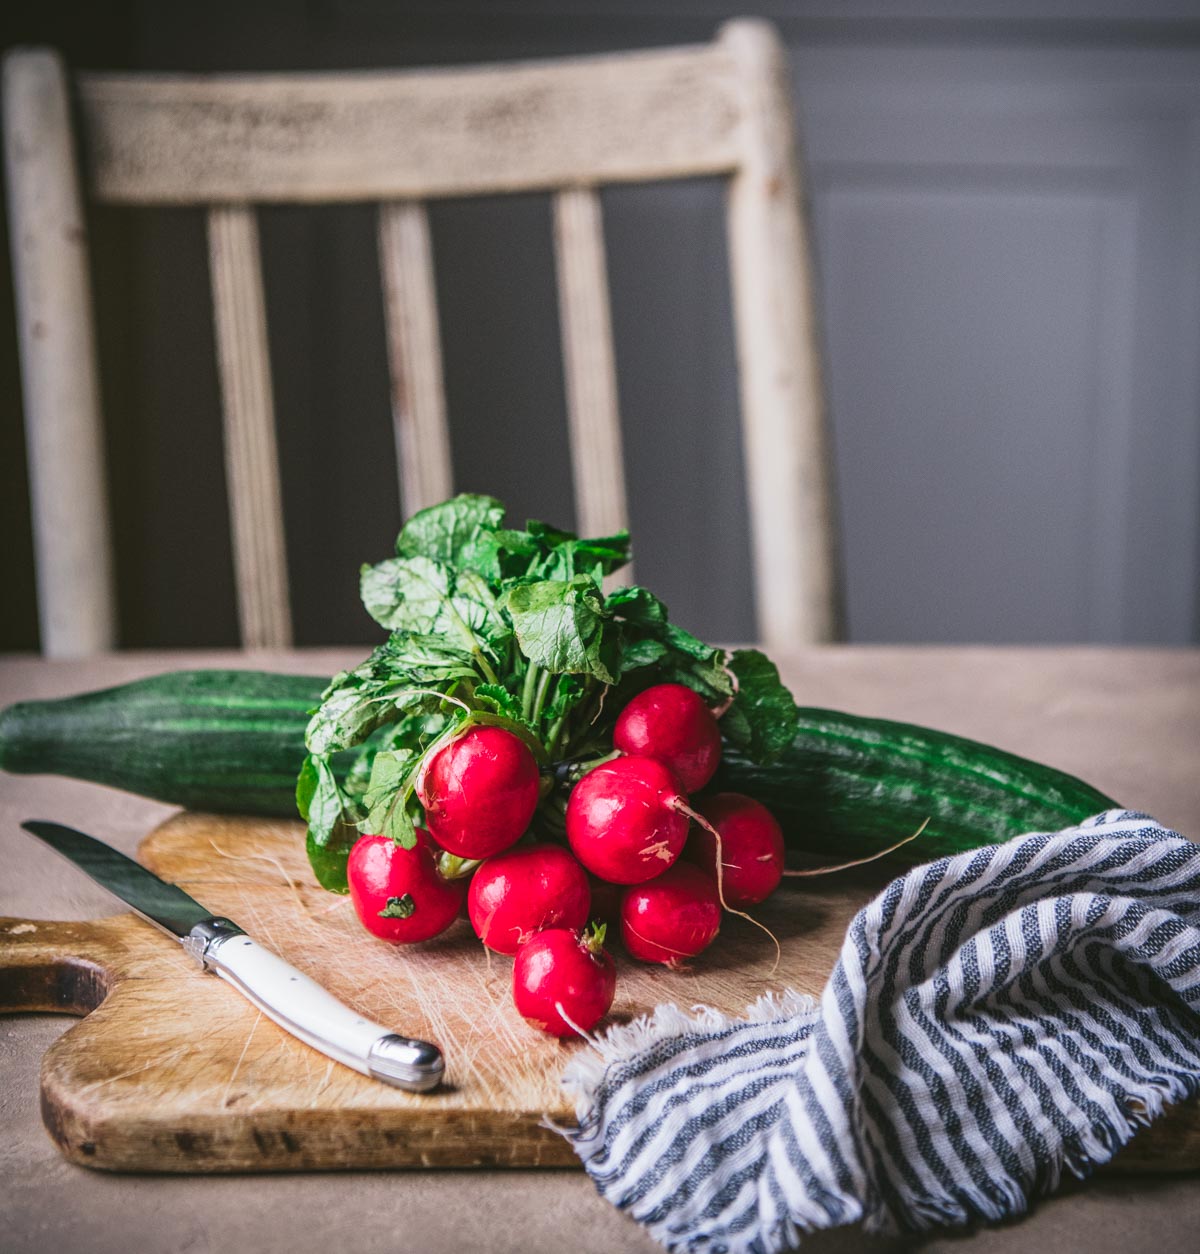 Cucumber and radishes on a vintage cutting board.